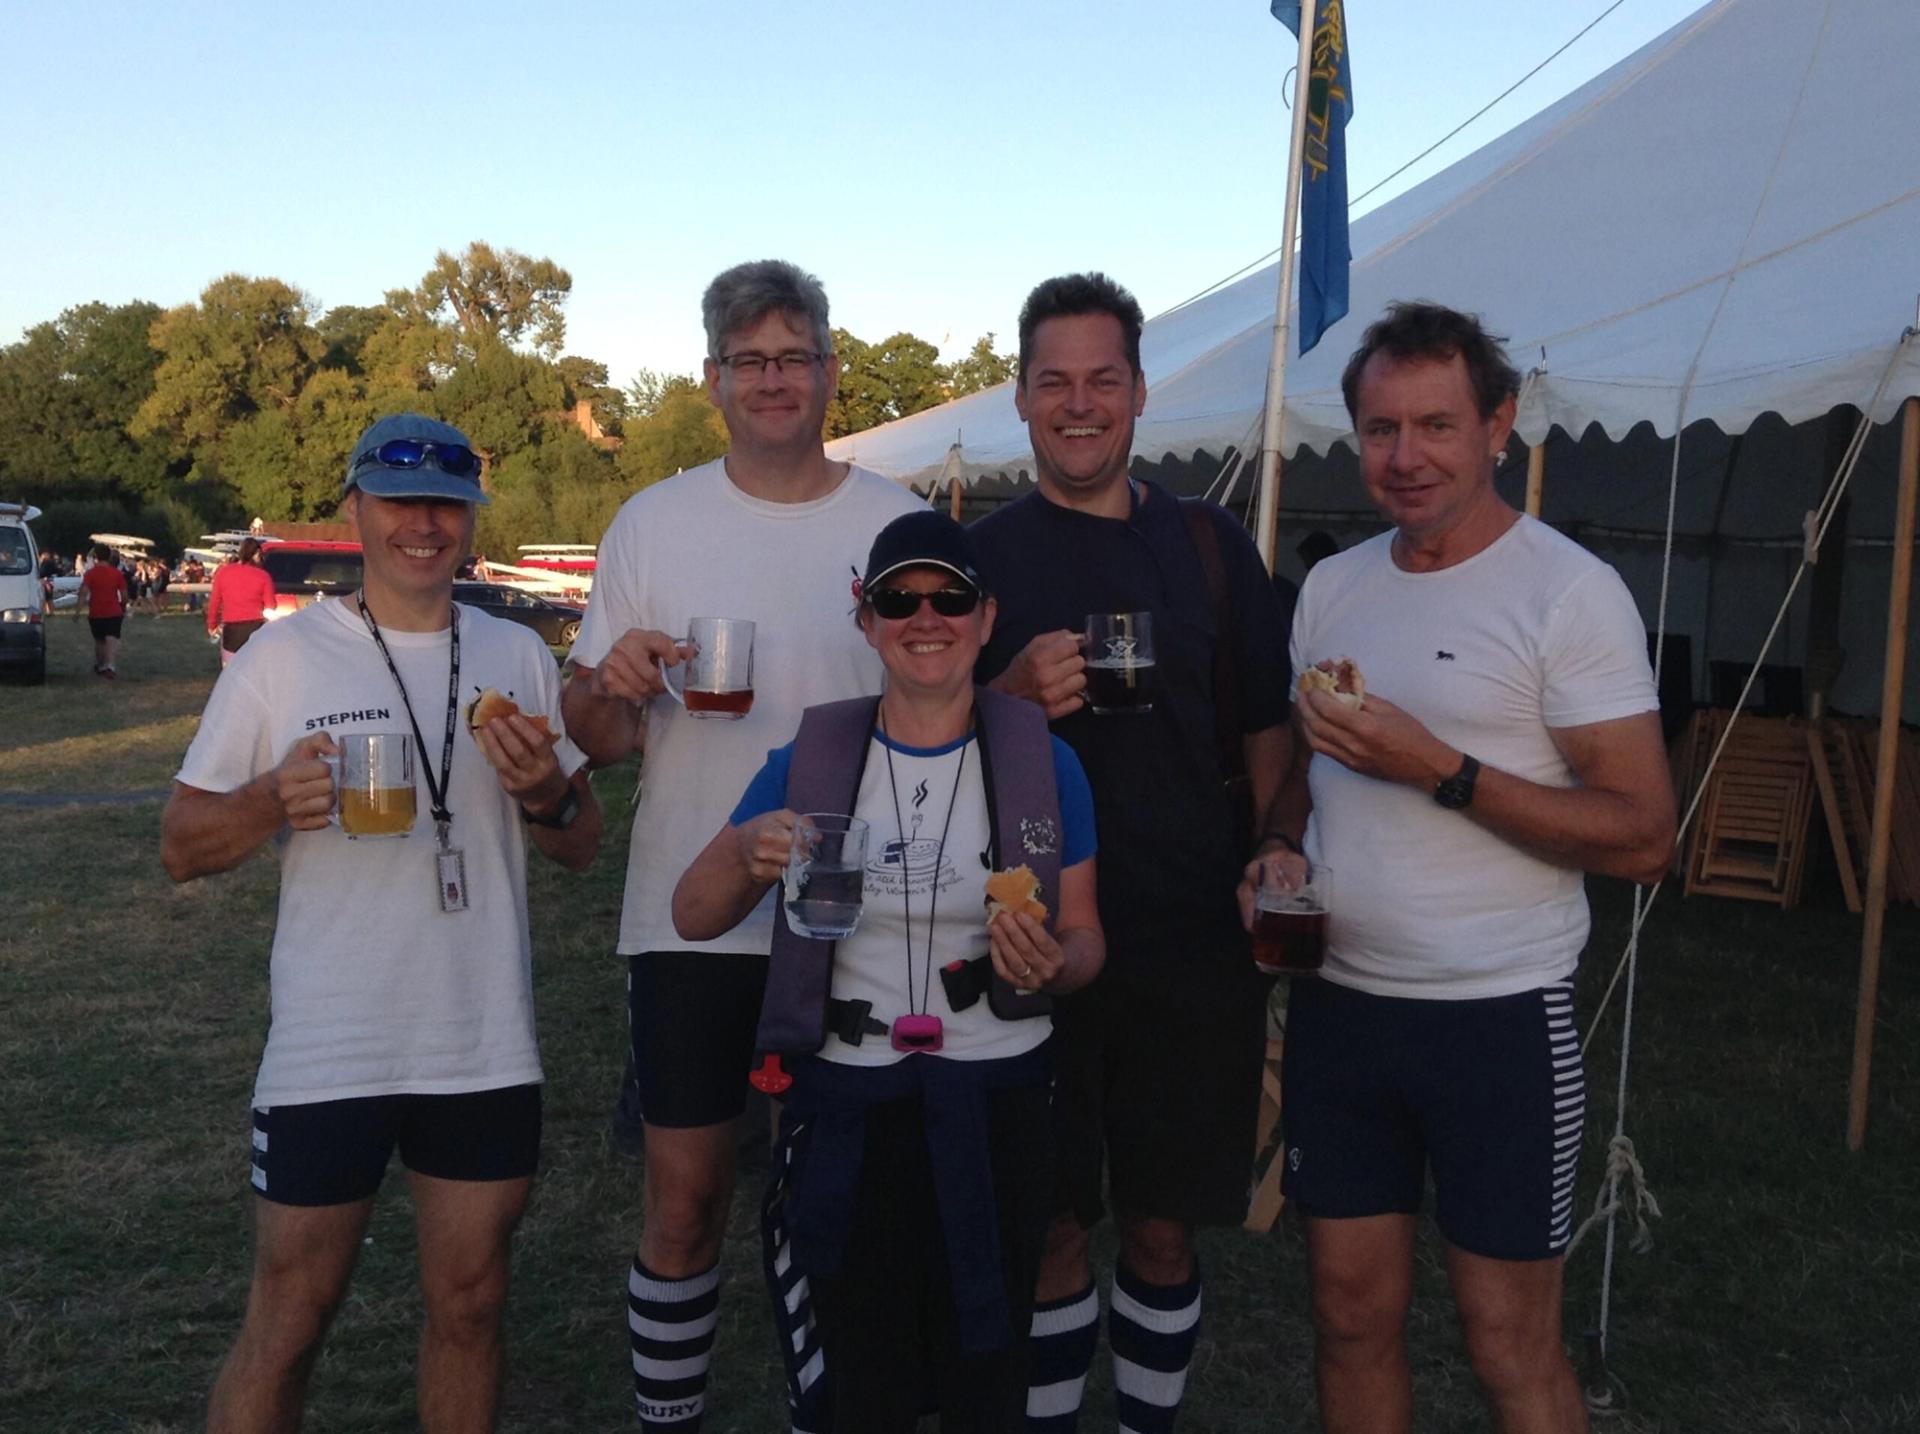 Four rowers and their cox, all holding nearly-empty beer tankards and posing outside a rustic marquee.